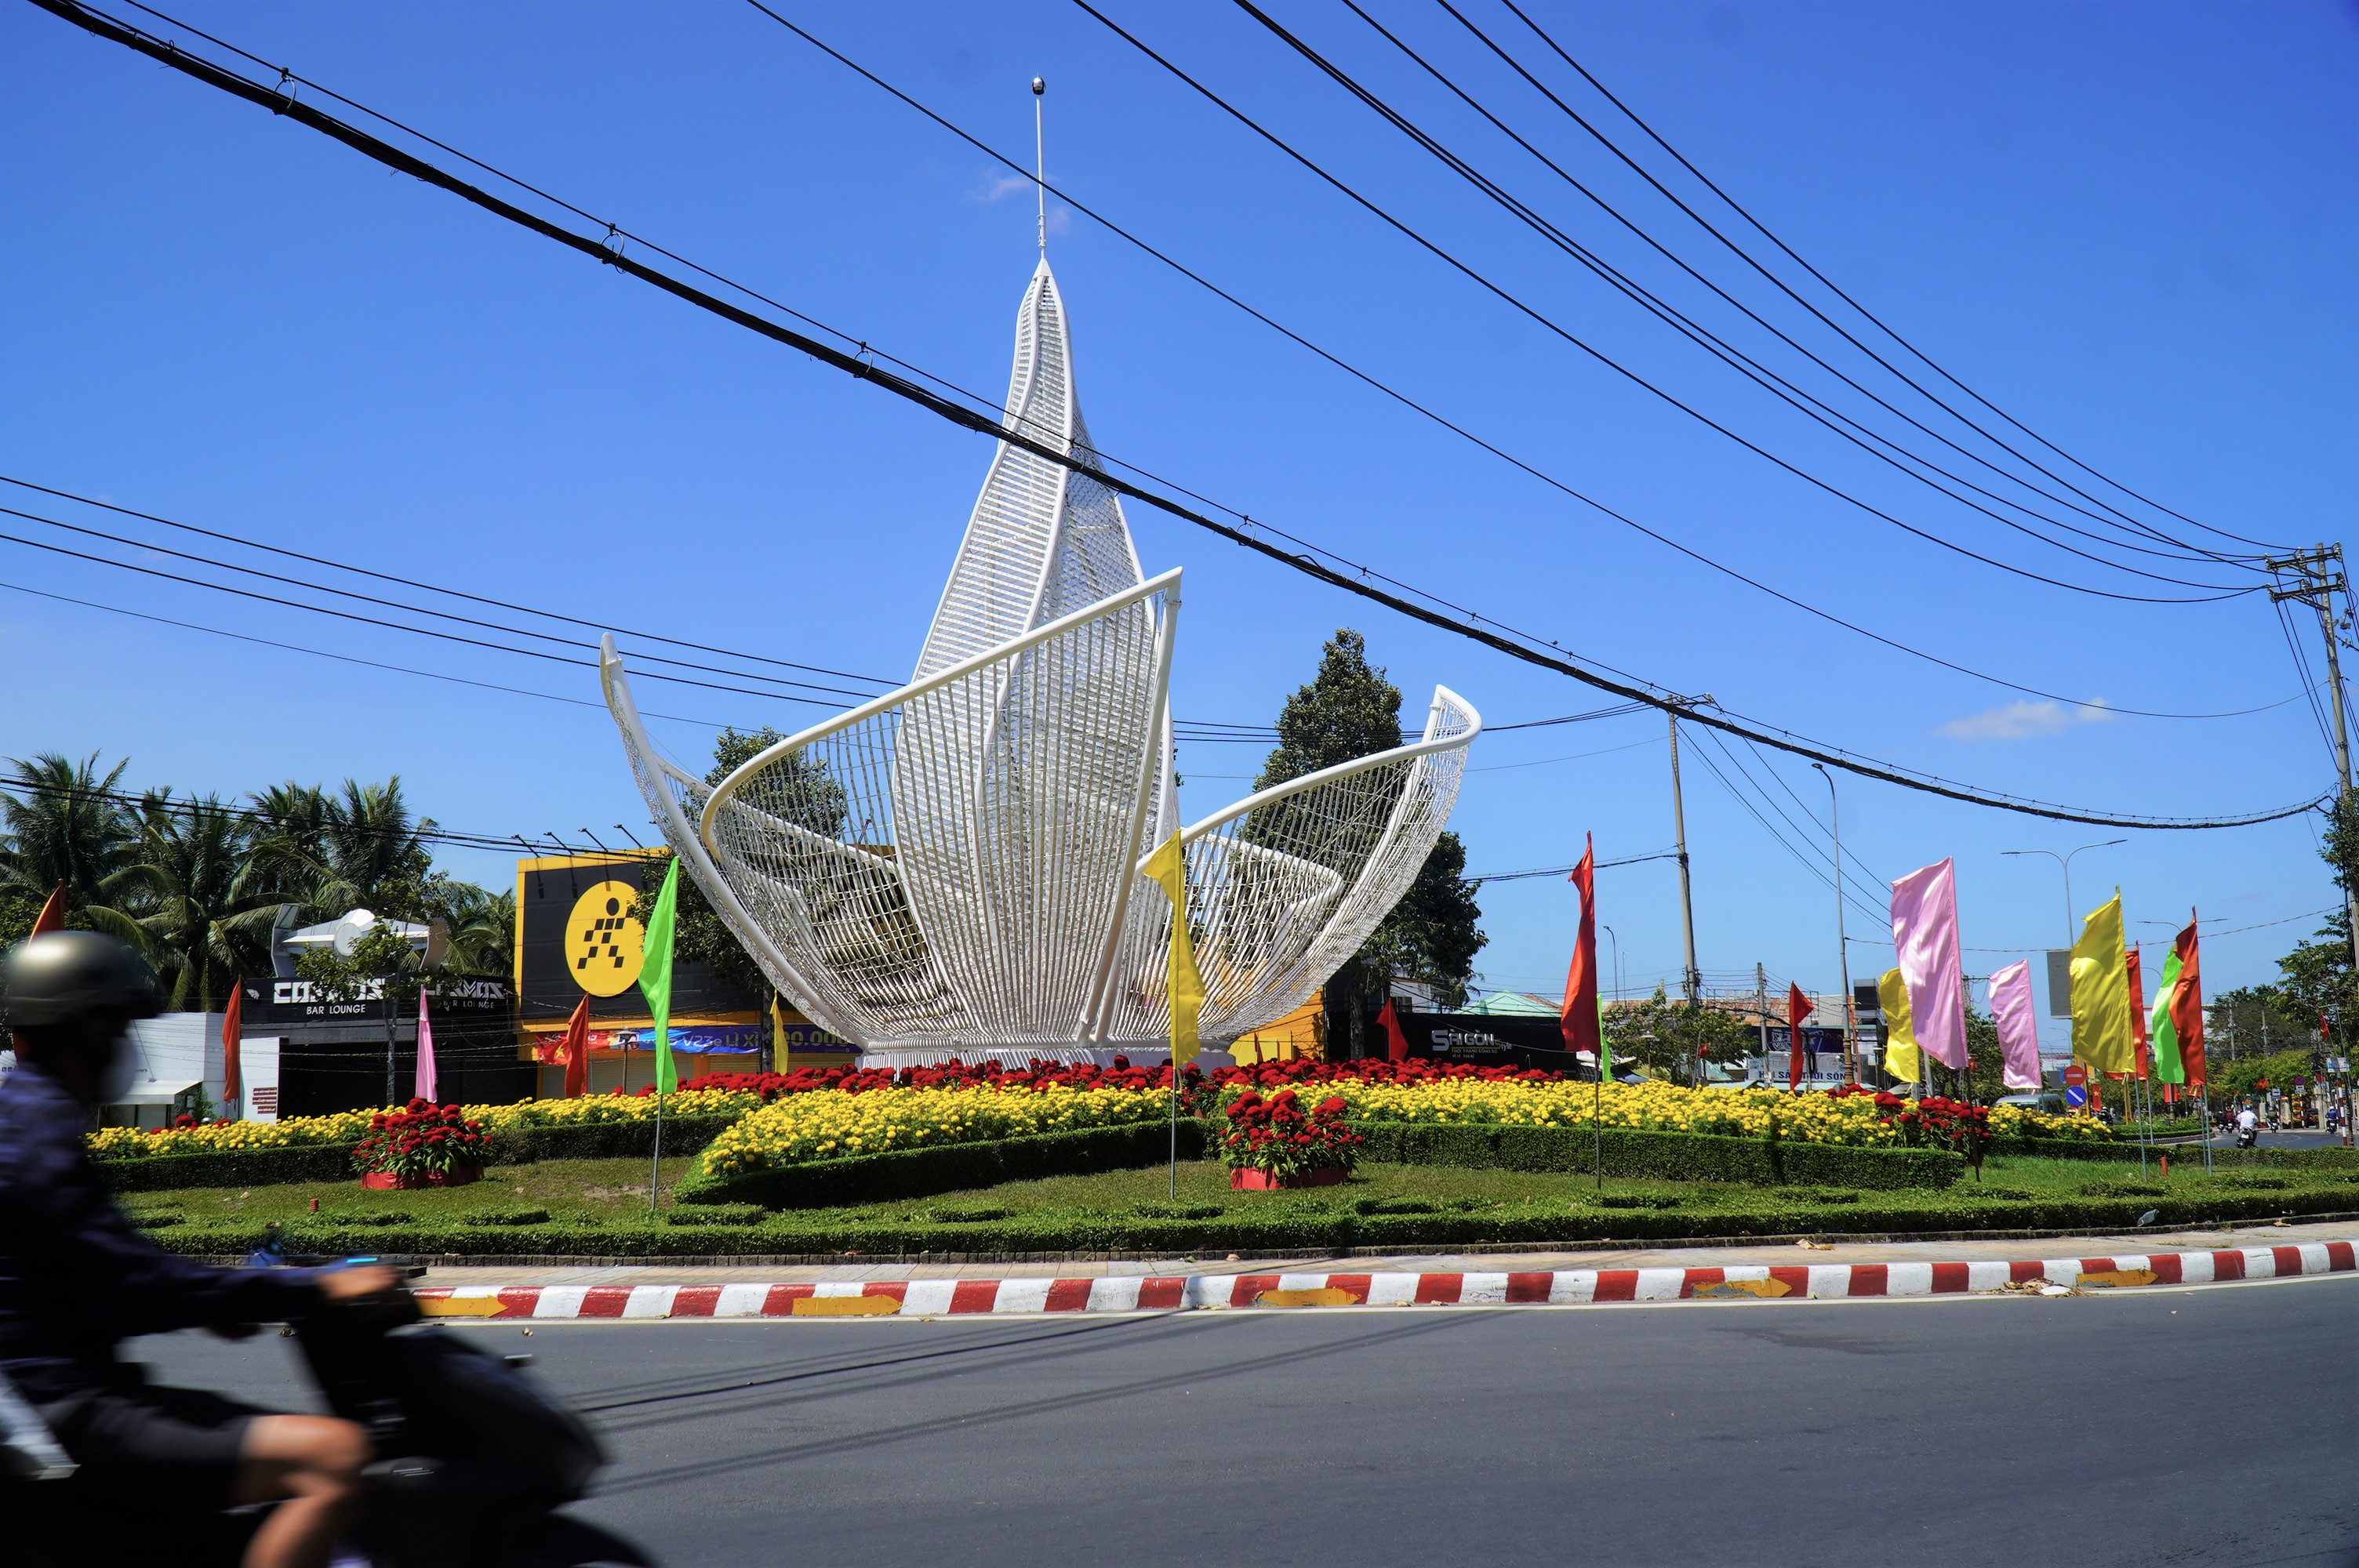 A lighting work is pictured at the intersection of Dong Tay Boulevard and Dong Khoi Boulevard in Ben Tre Province, Vietnam. Photo: Mau Truong / Tuoi Tre